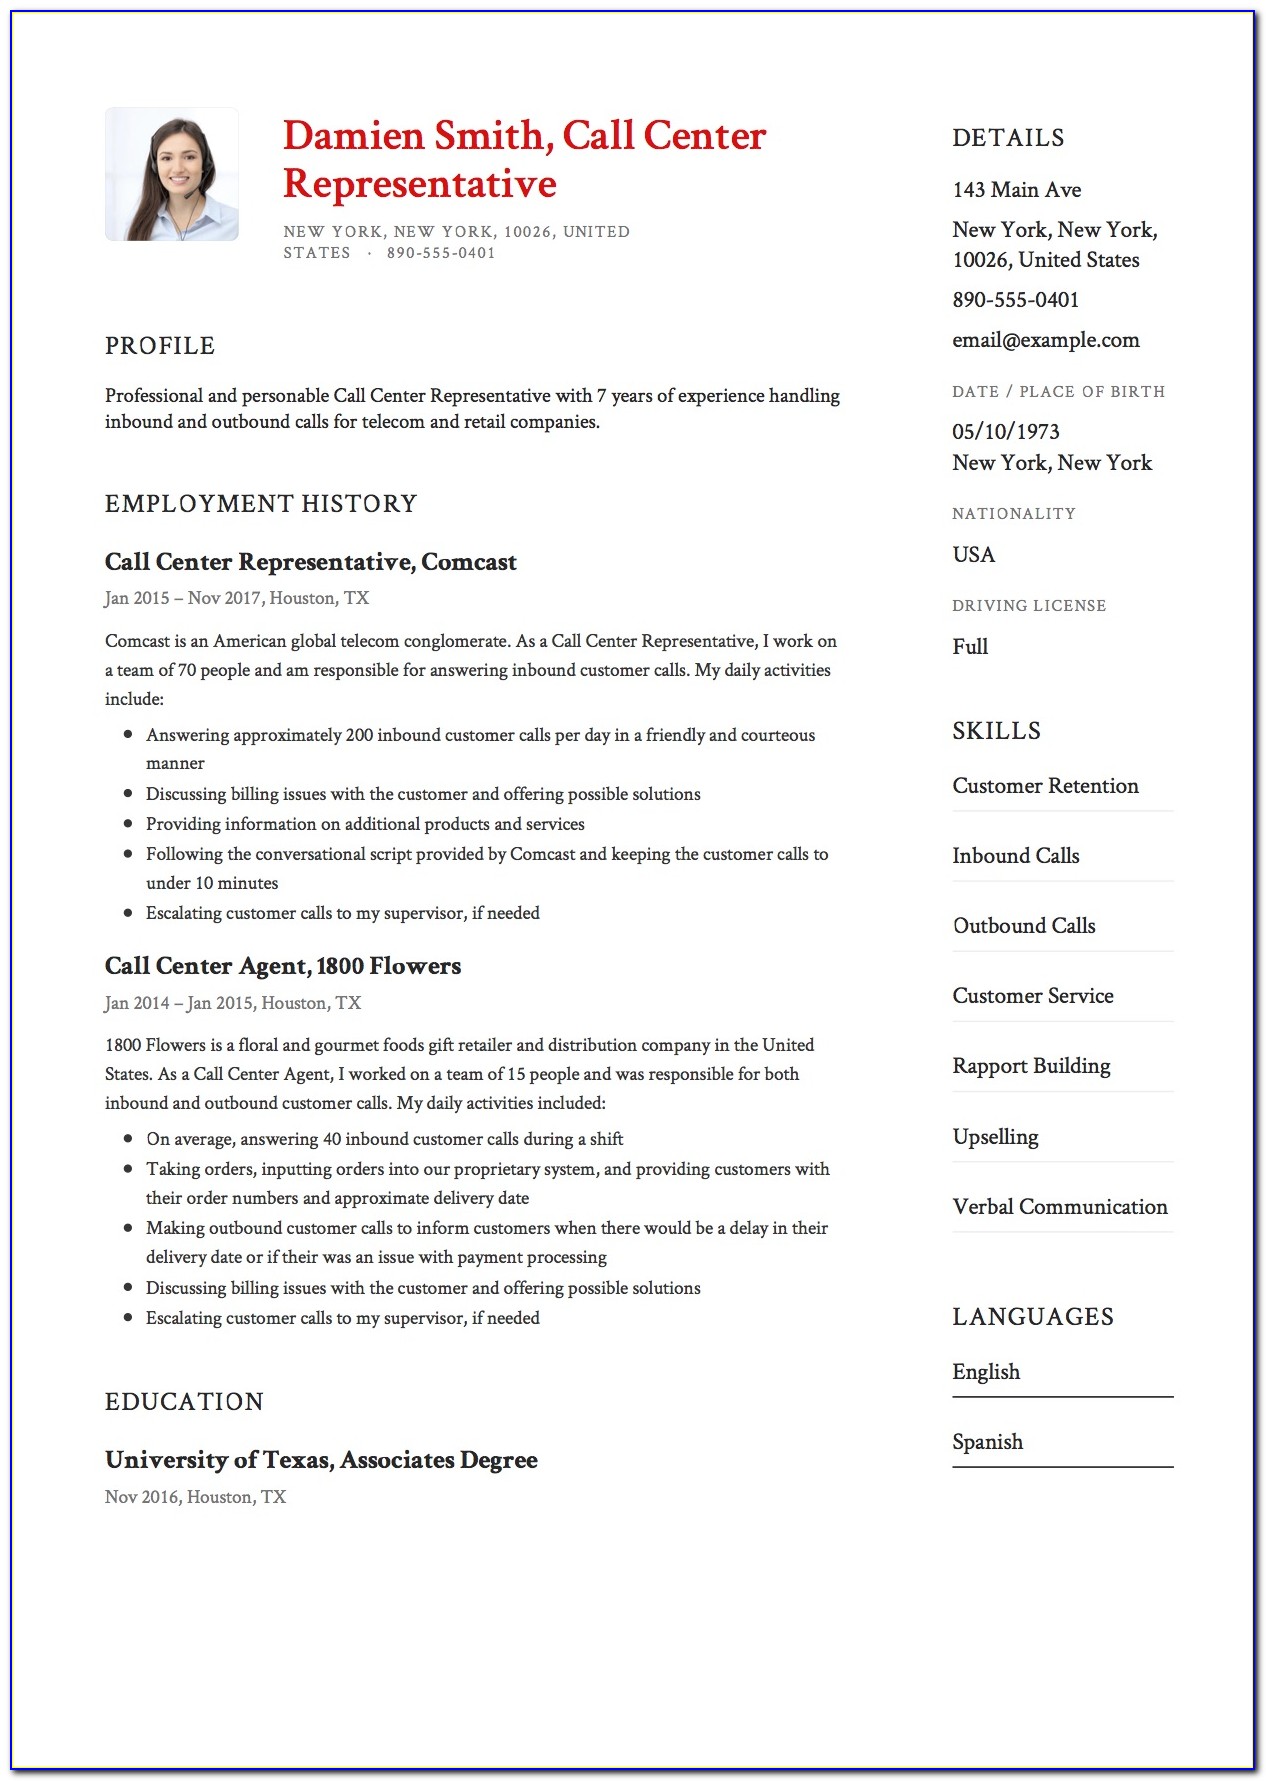 Call Center Resume Format In Word